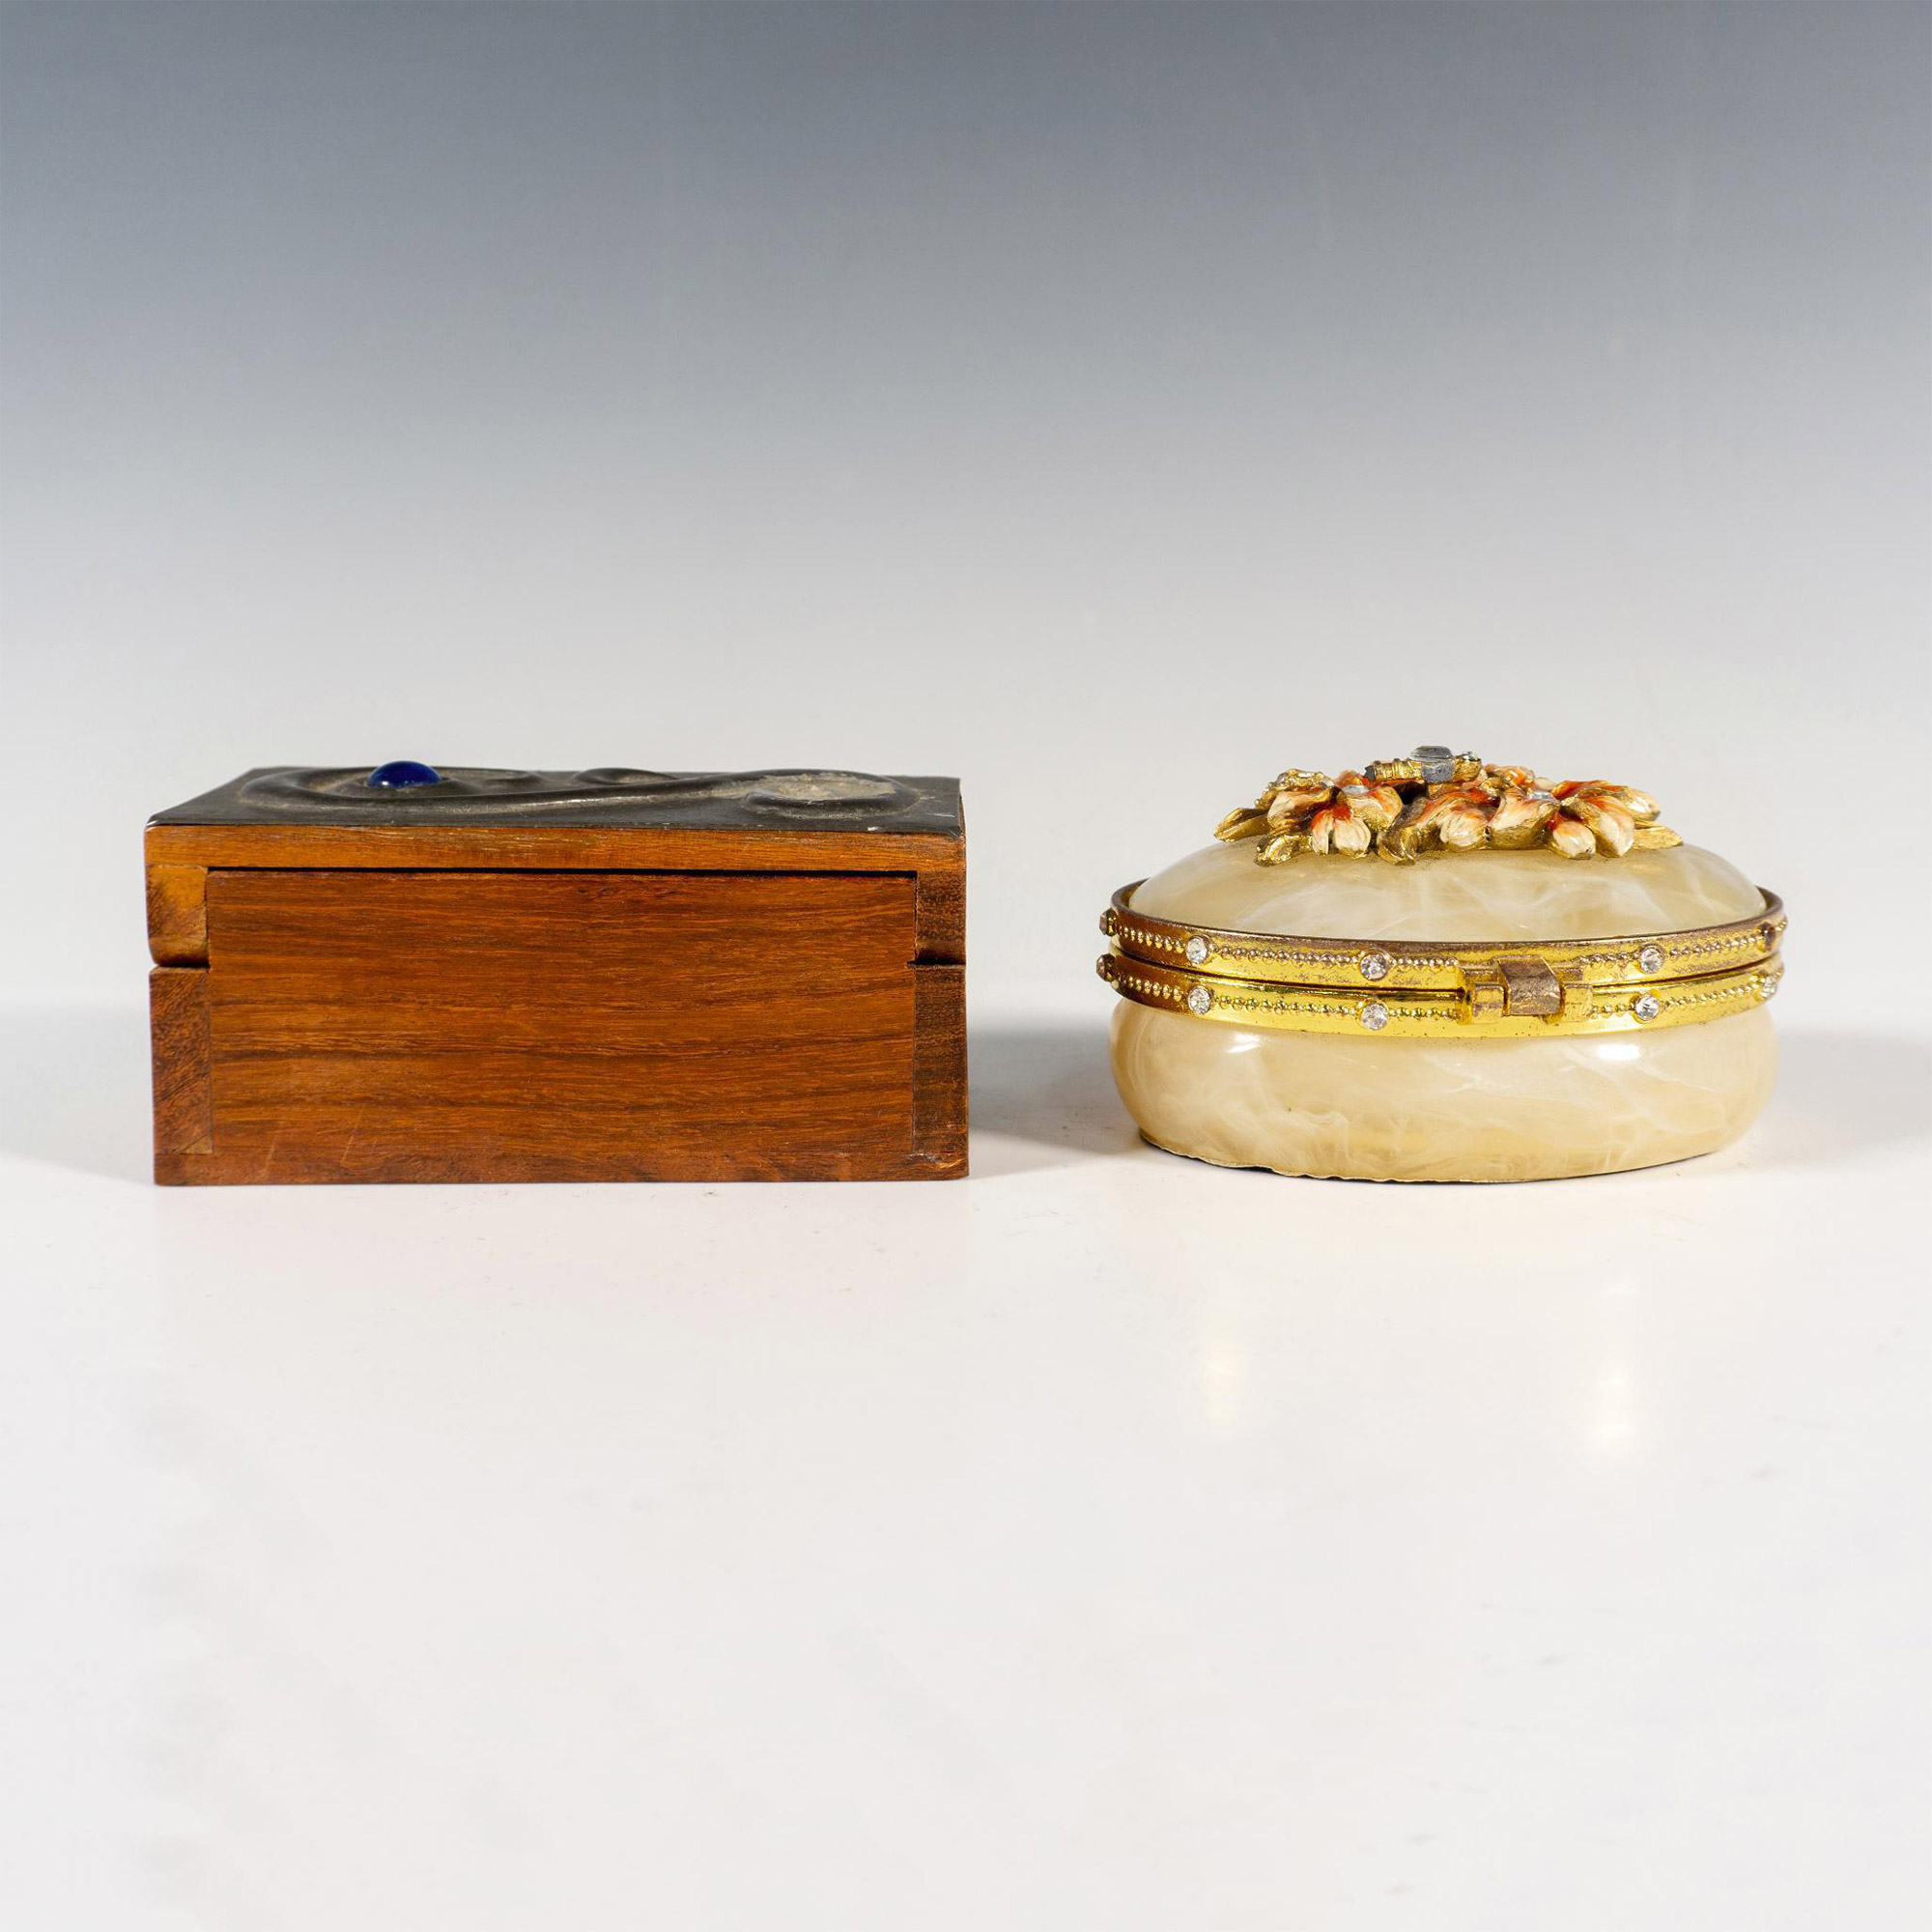 2pc Vintage Wooden and Enamel Jewelry Boxes - Image 3 of 6